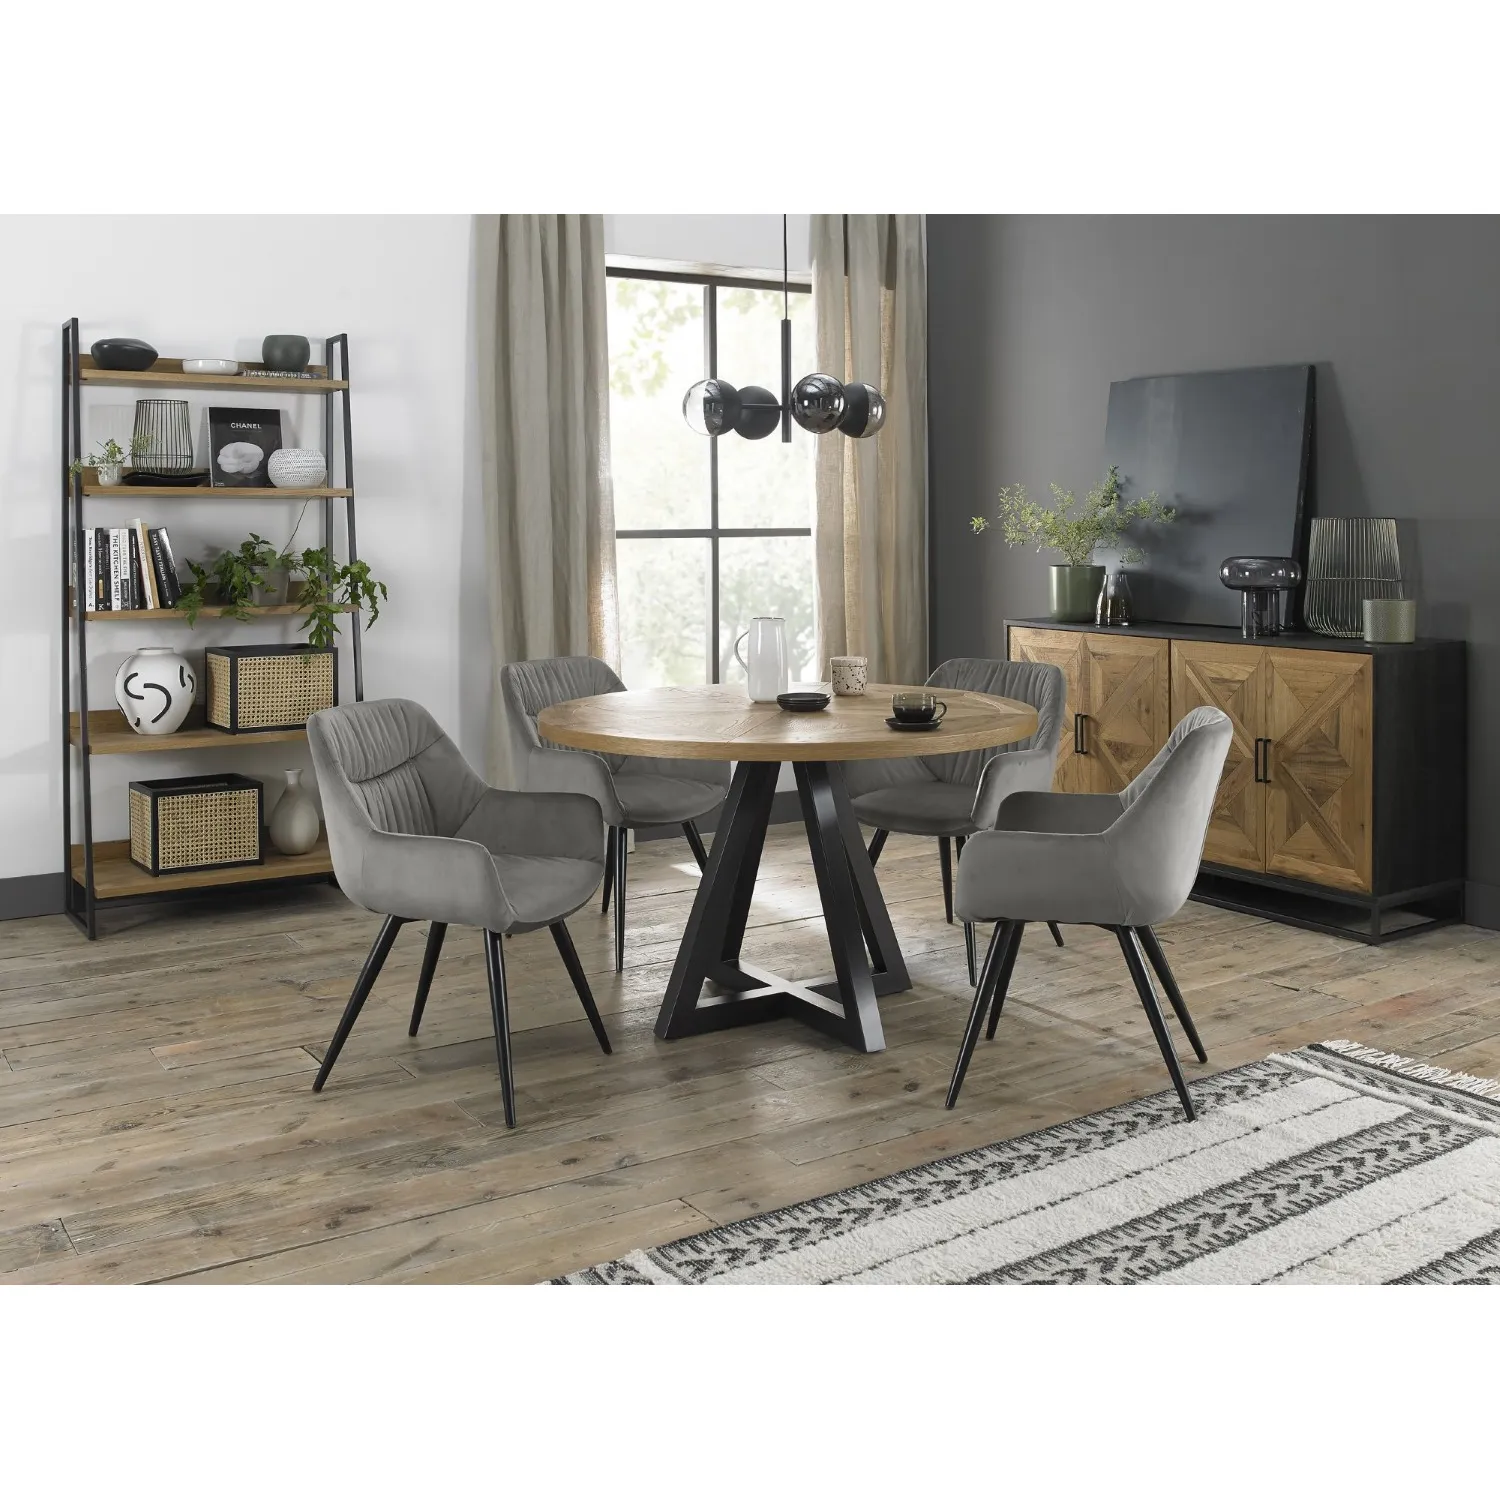 Rustic Oak Round Dining Table Set 4 Grey Tub Chairs